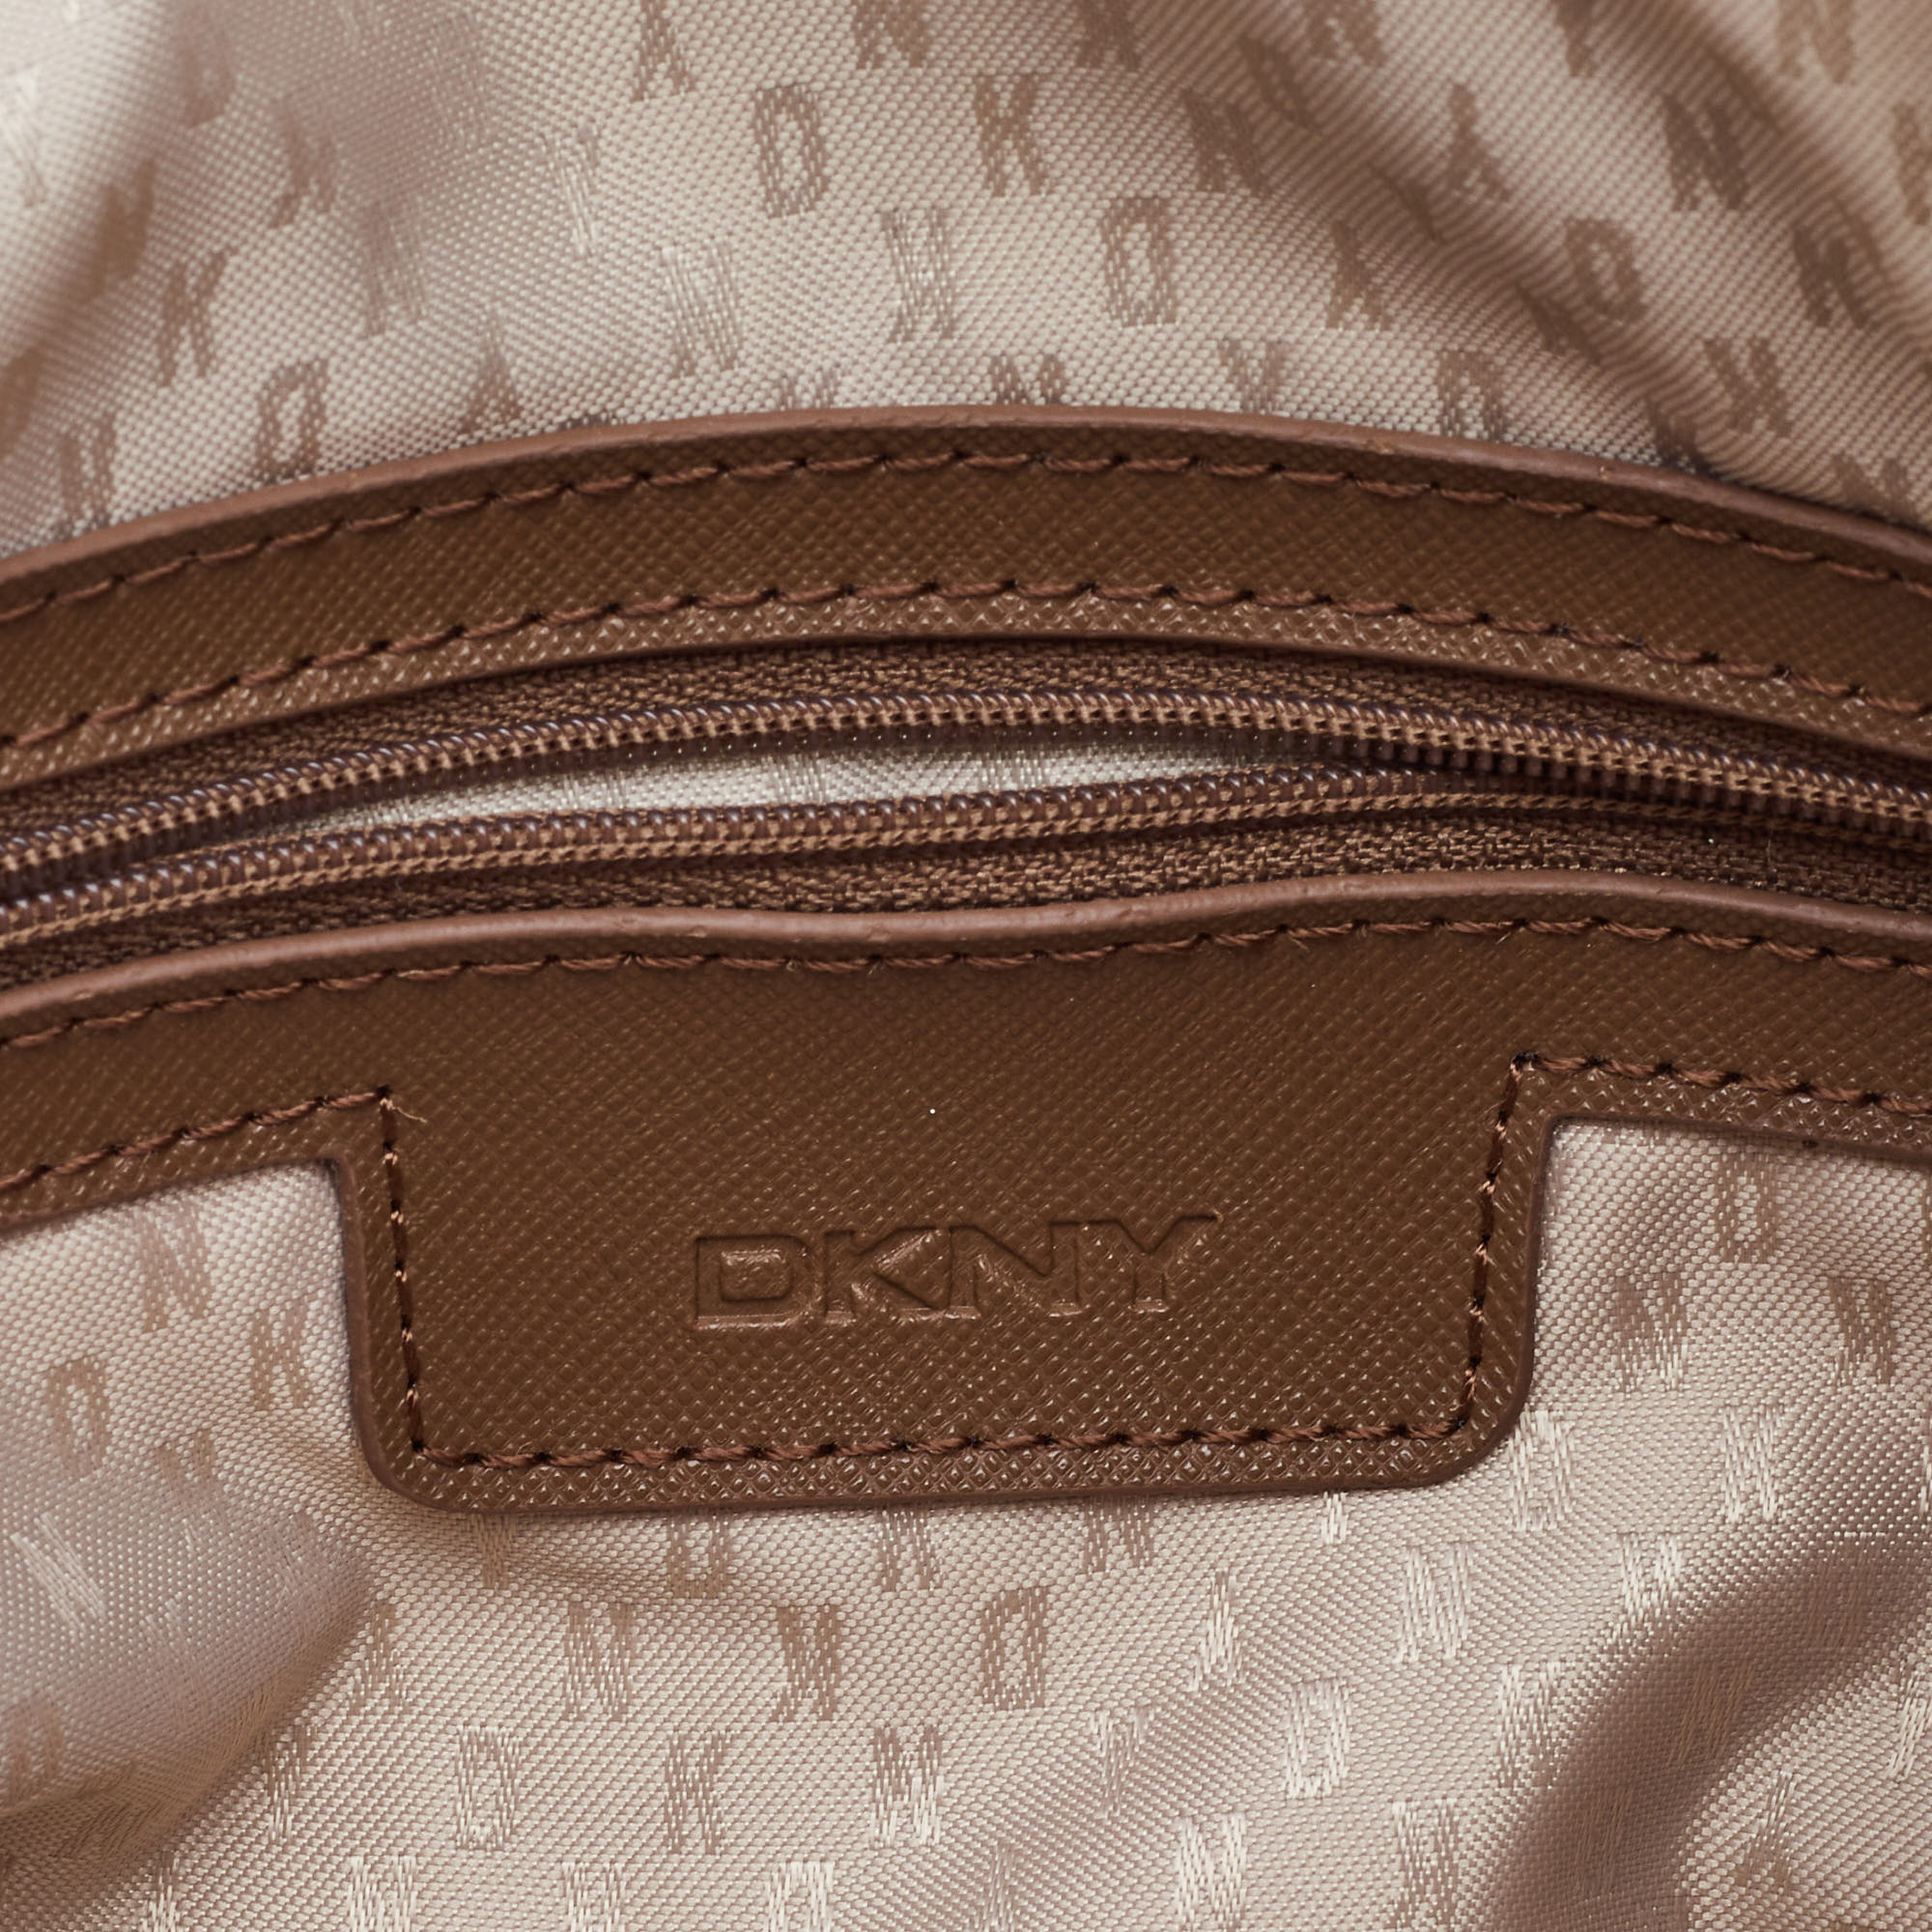 DKNY Brown Pebbled Leather Chain Tote